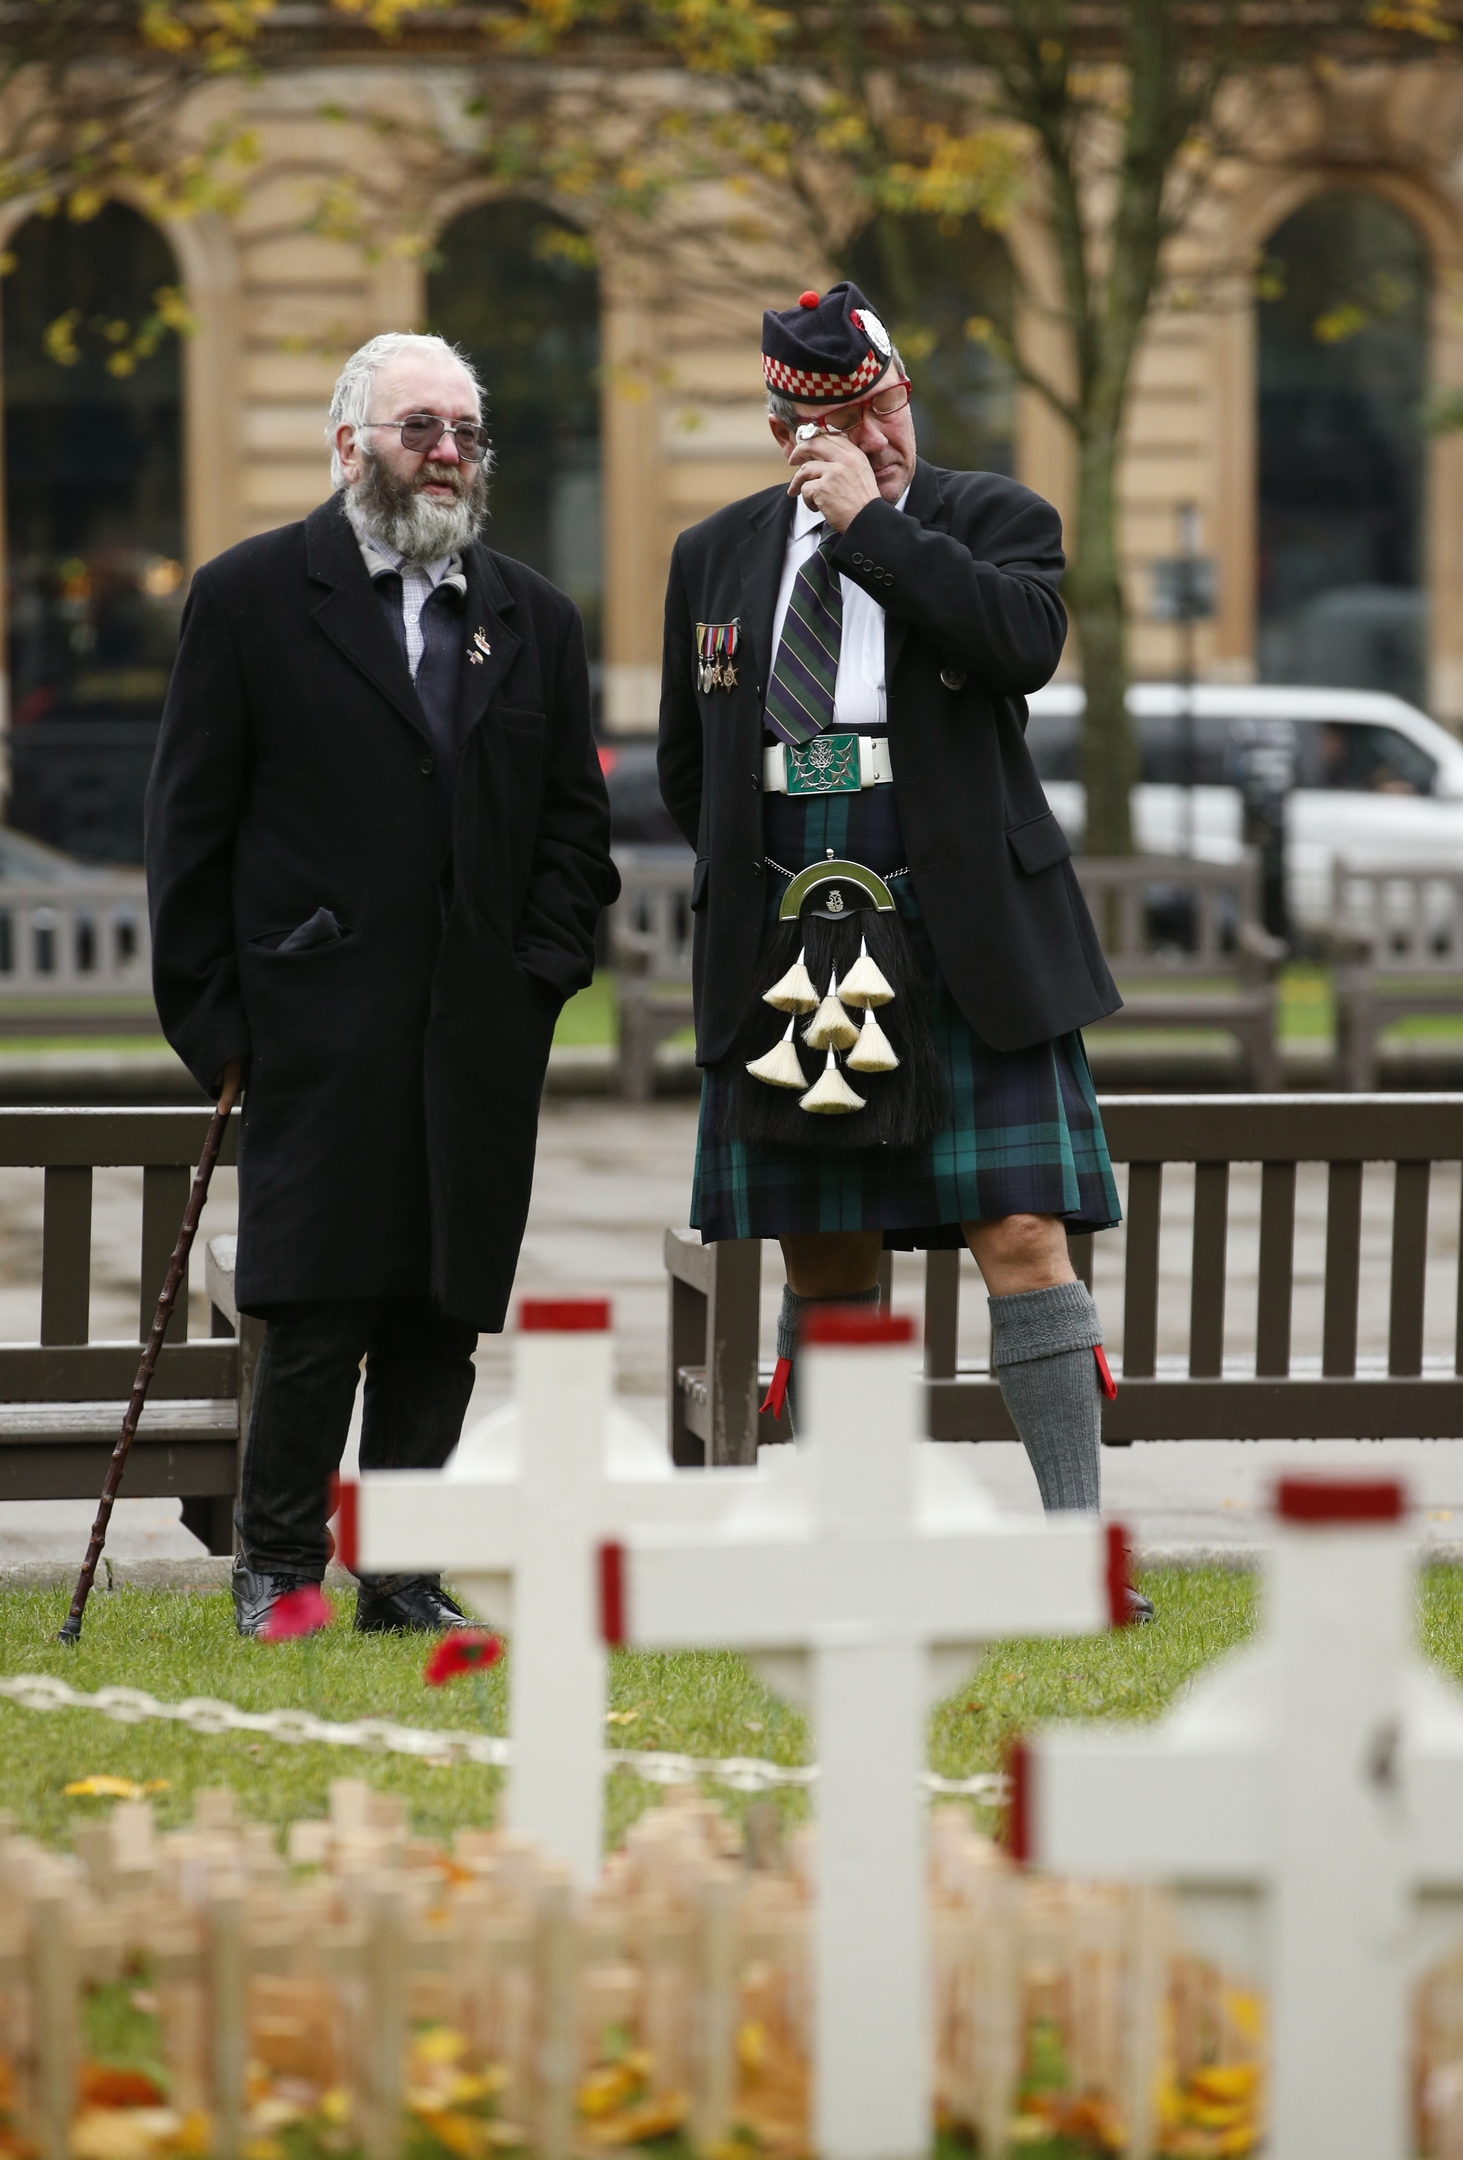 James McEwan (right), who served with the Argyll and Sutherland Highlanders, sheds a tear as he looks at the garden of remembrance in George Square, Glasgow, alongside Peter Ferguson, who lost his son in the Iraq conflict. PRESS ASSOCIATION Photo. Picture date: Wednesday November 11, 2015. Two minutes silence is set to be observed to mark Armistice Day, the anniversary of the end of the First World War. 